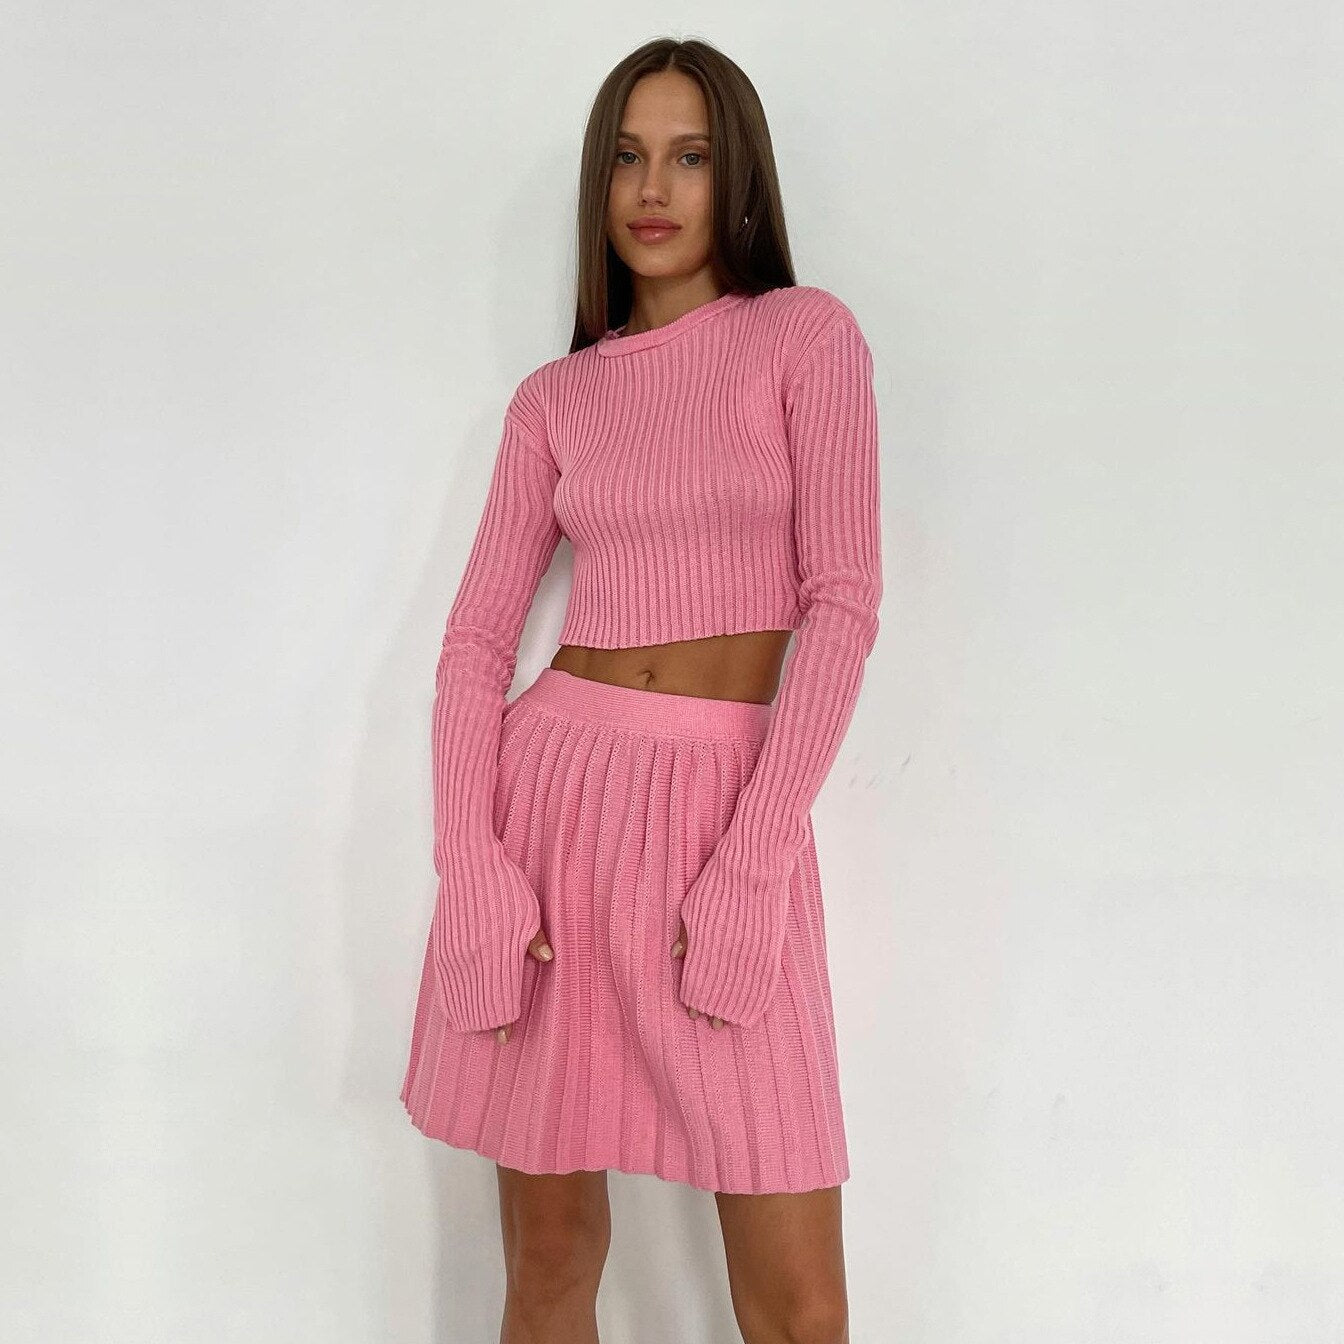 Tossy Knit Two Piece Sets Mini Pleated Skirt Suits Long Sleeve Cropped Sweater Top For Women 2023 Casual Outfits Matching Sets